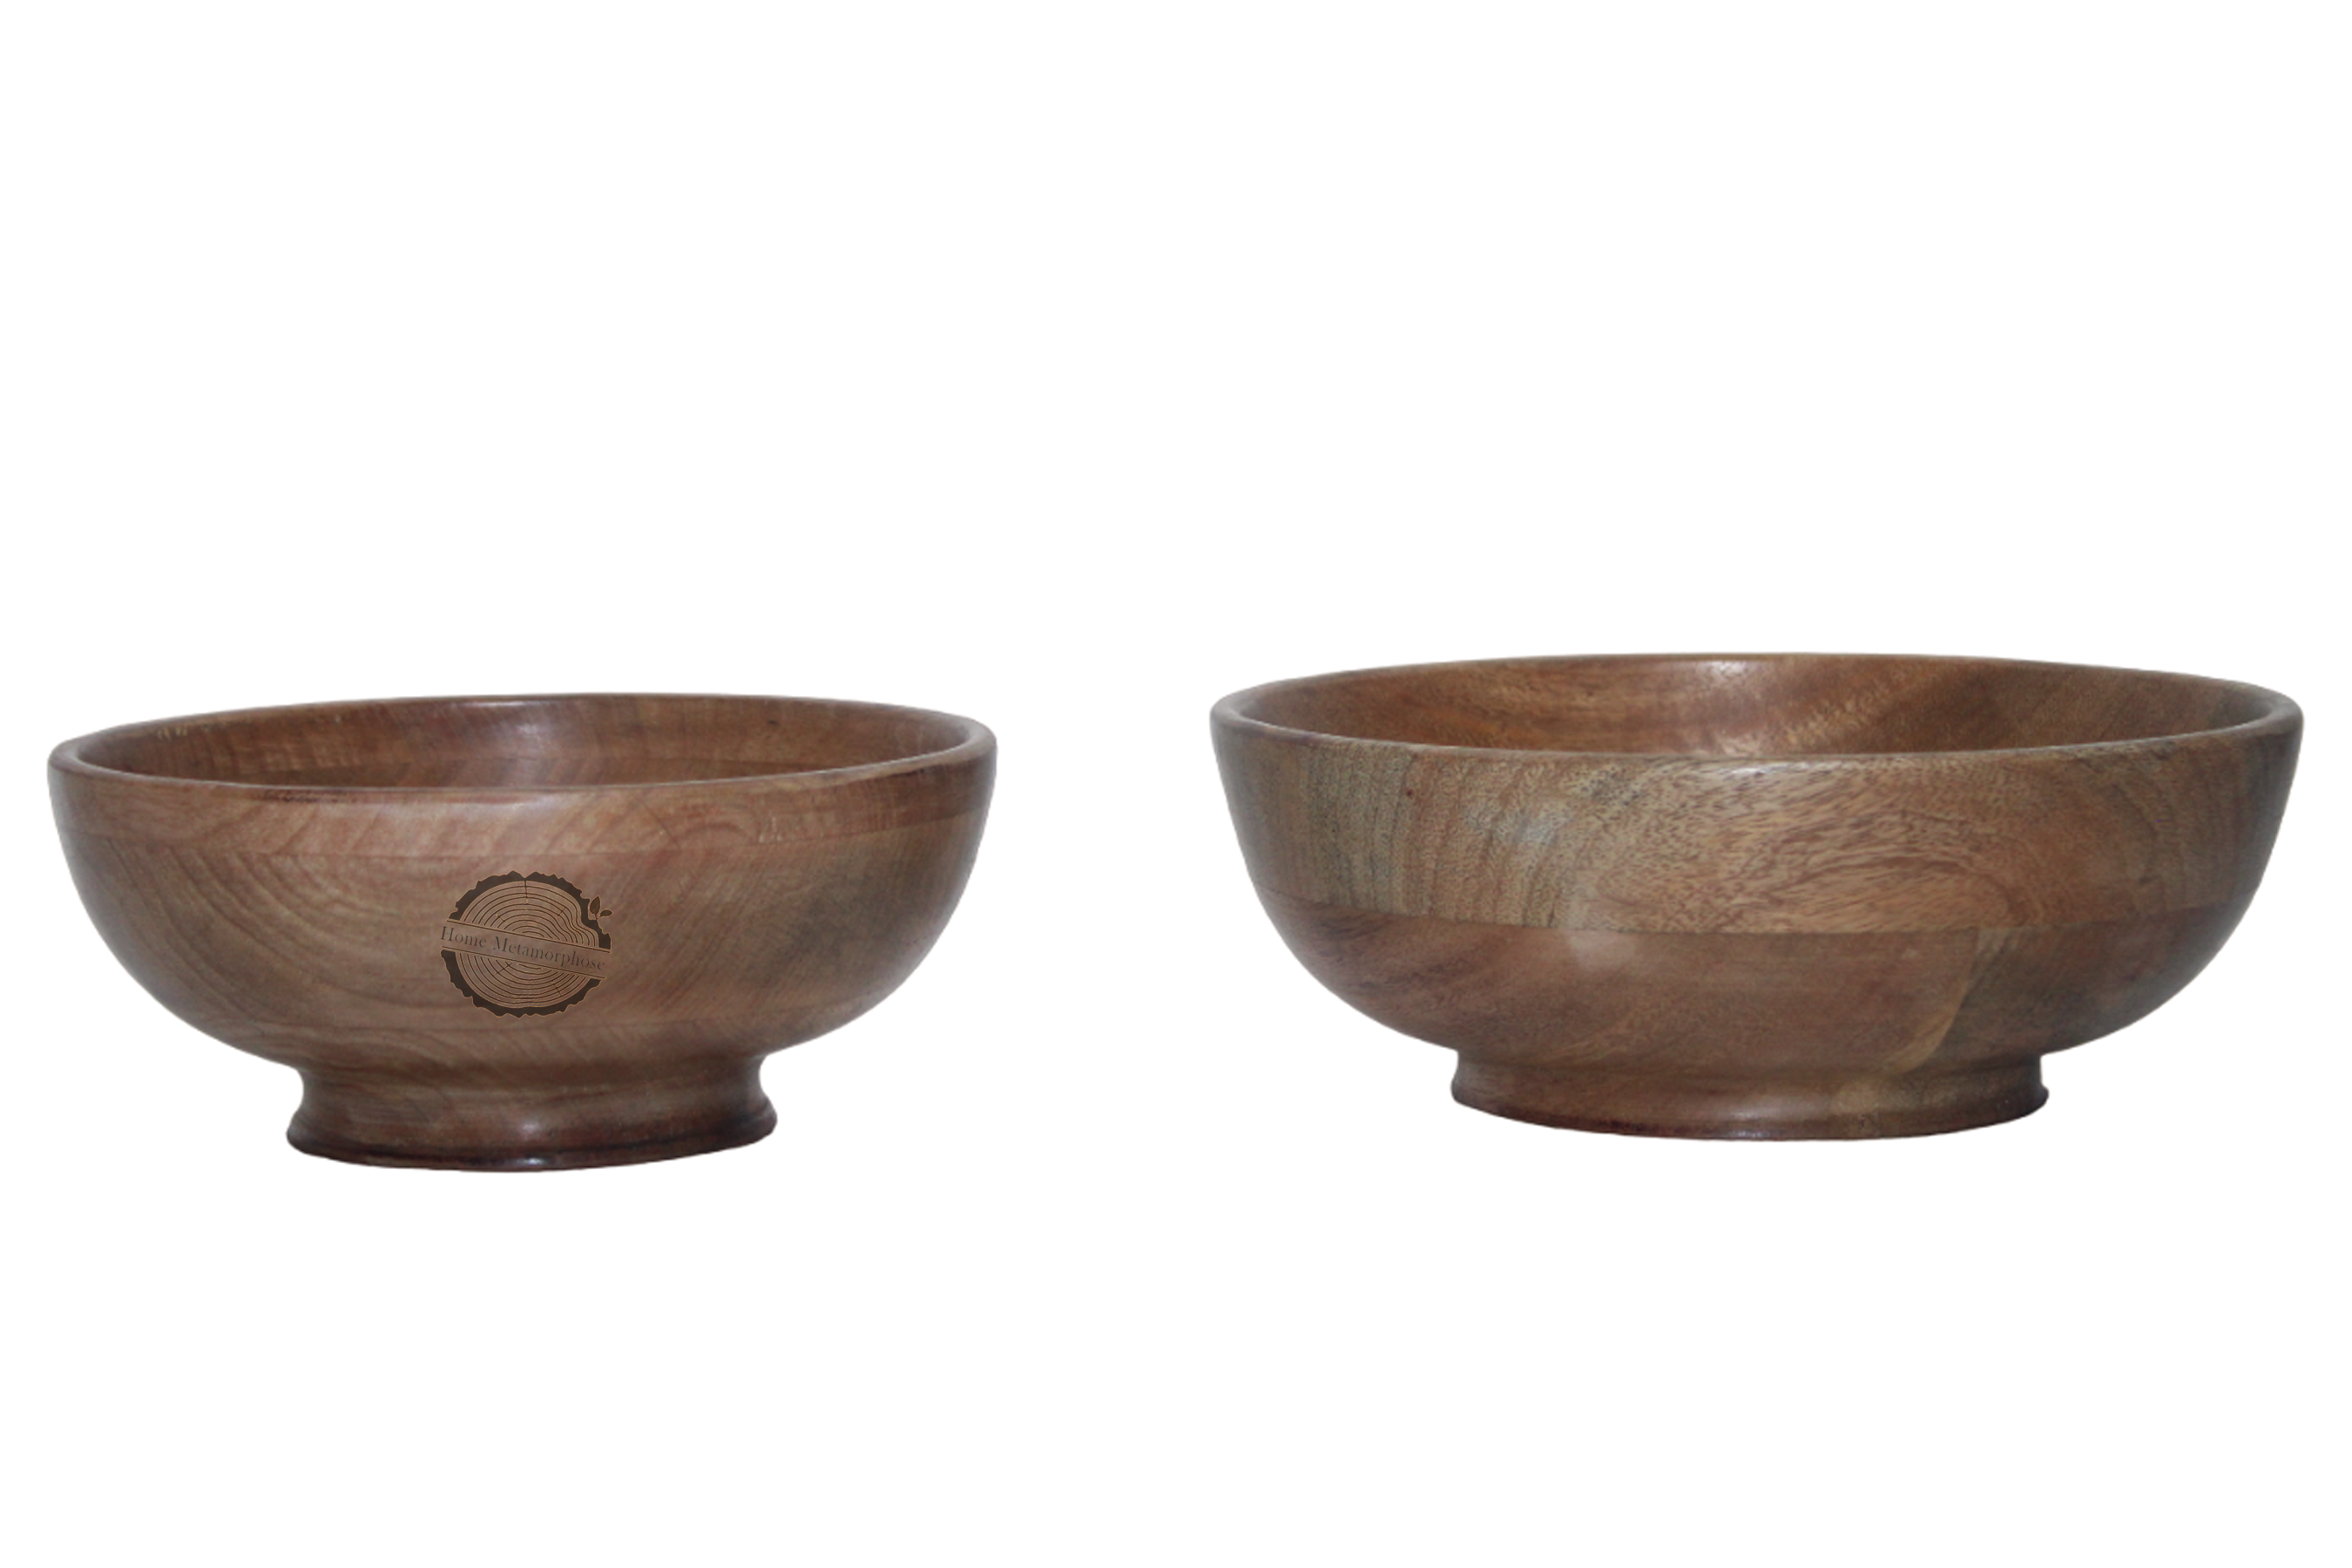 Large and small set of two Mango Wood Bowls, Designer Salad Utensil with Enamel Oil Finish for Fruits, Vegetable, Snacks, Dough Making Mixing & Serving Bowl for Kitchen, Dining, Restaurants | 11